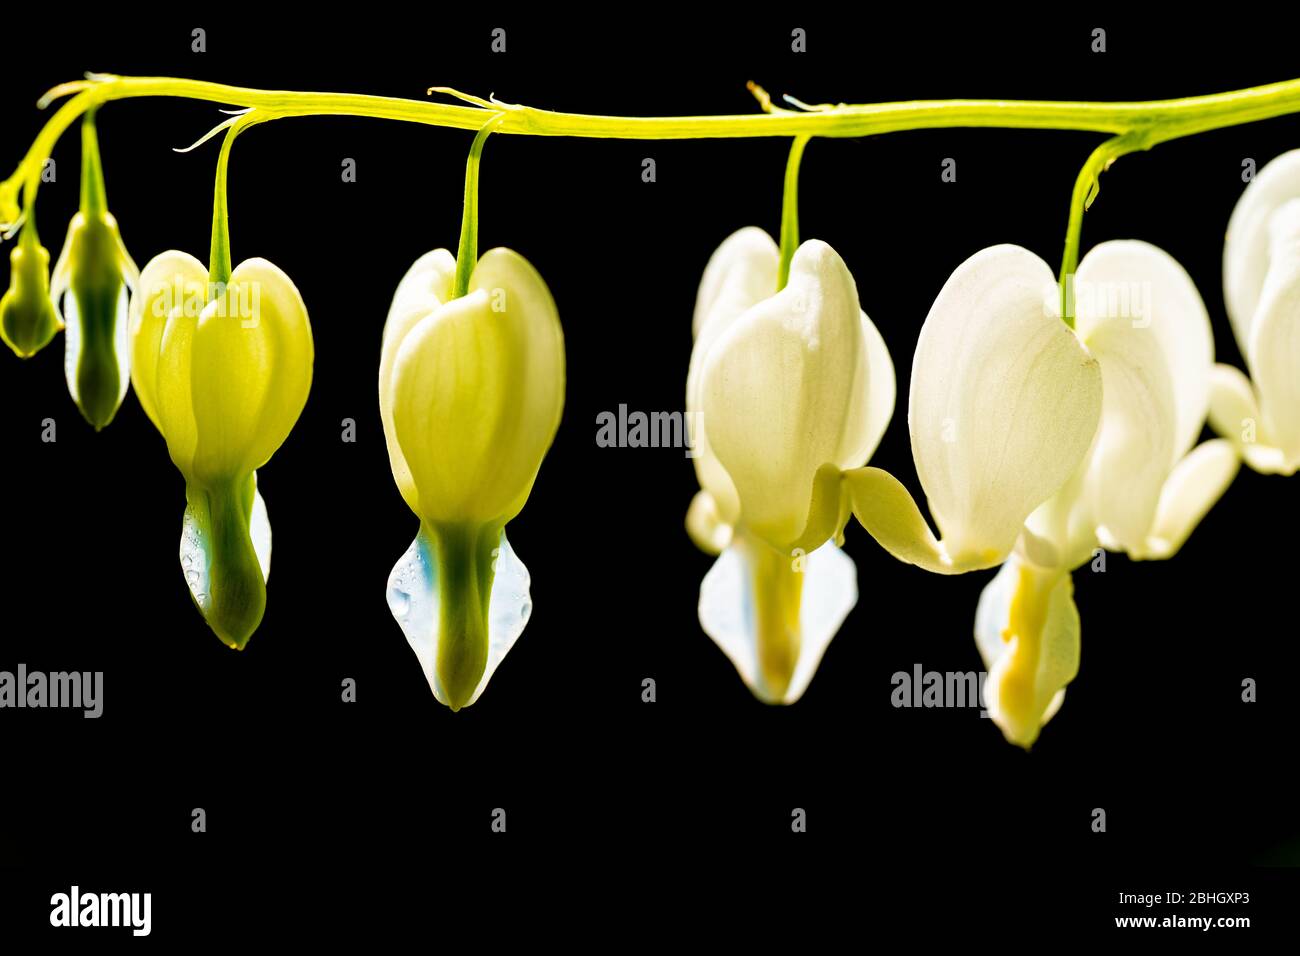 Close-up / macro photograph of white bleeding heart (Dicentra) flowers in a UK garden horizontal stem against a black background Stock Photo